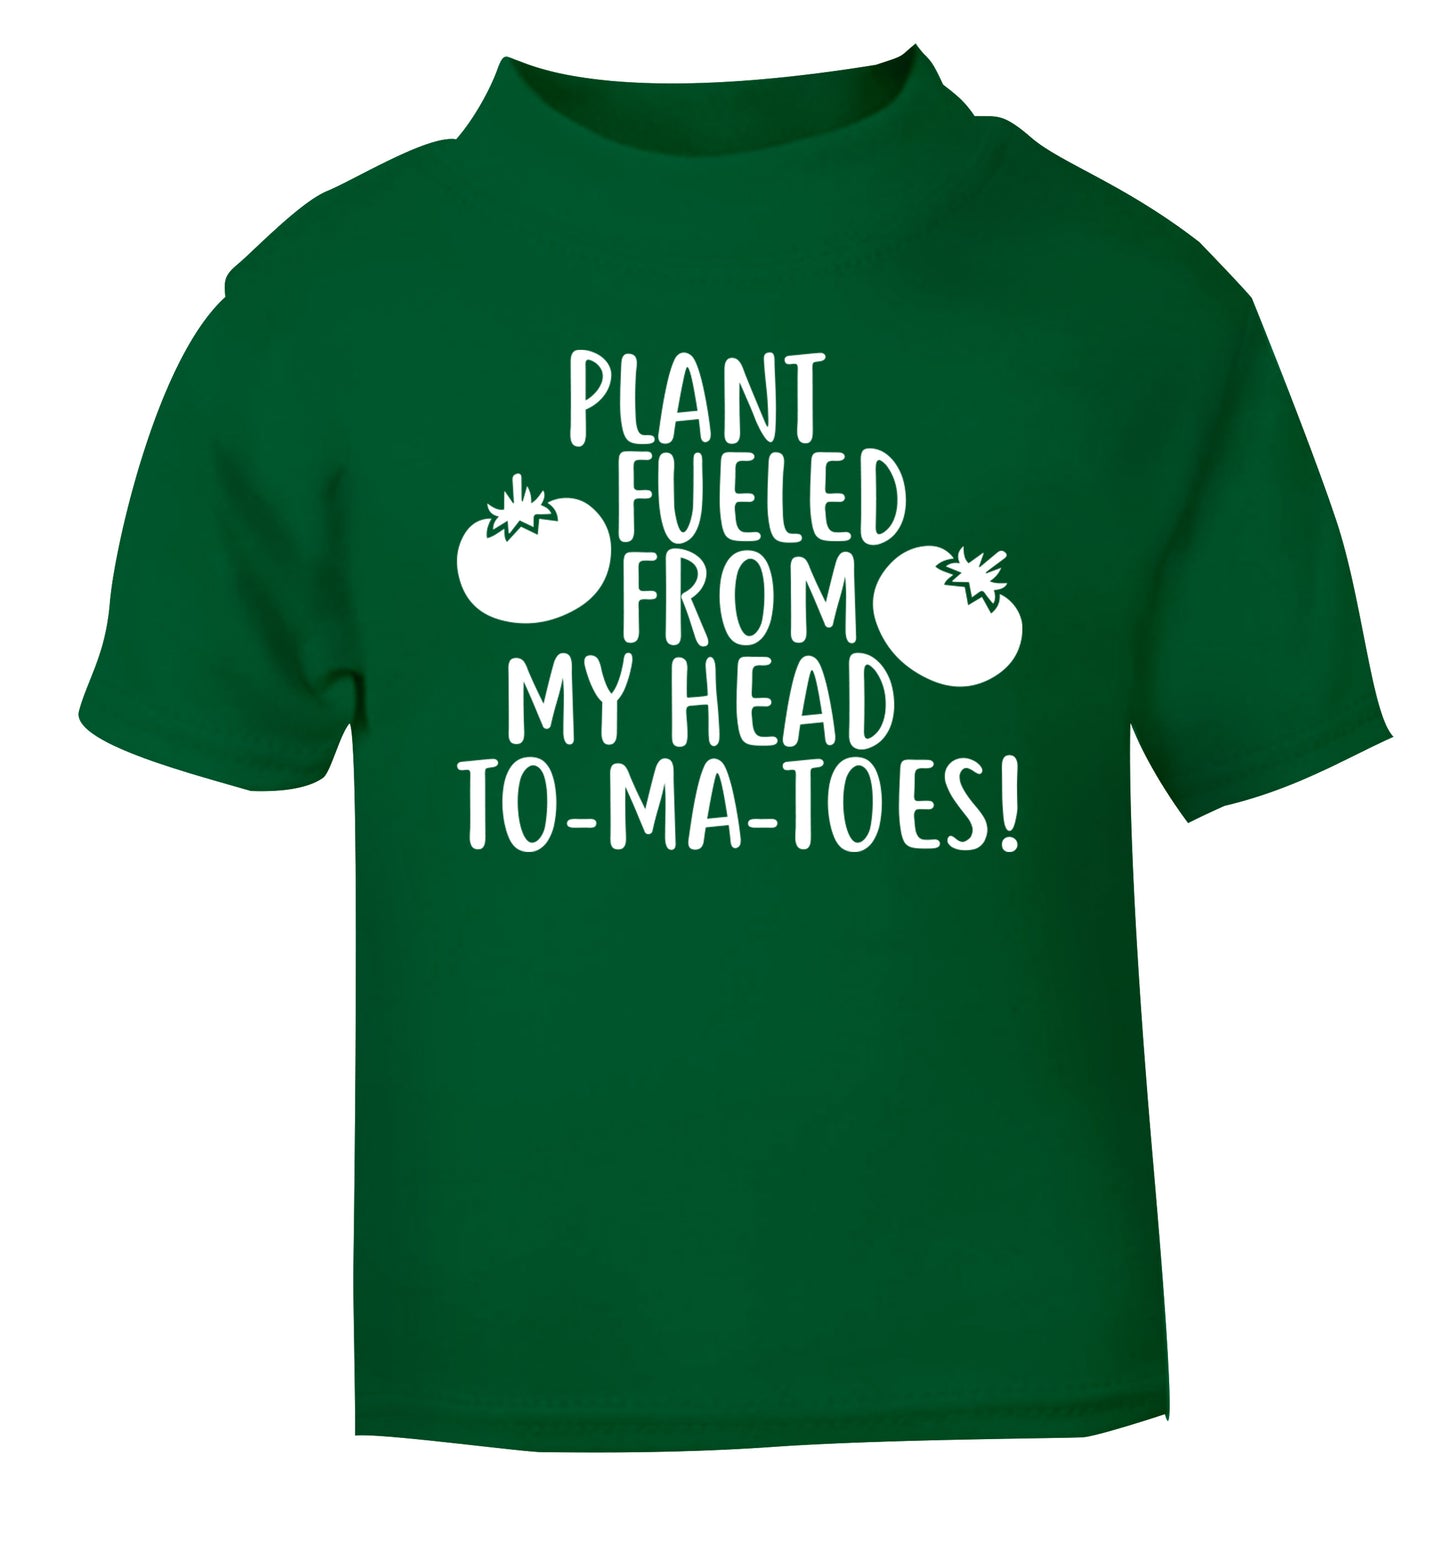 Plant fueled from my head to-ma-toes green Baby Toddler Tshirt 2 Years